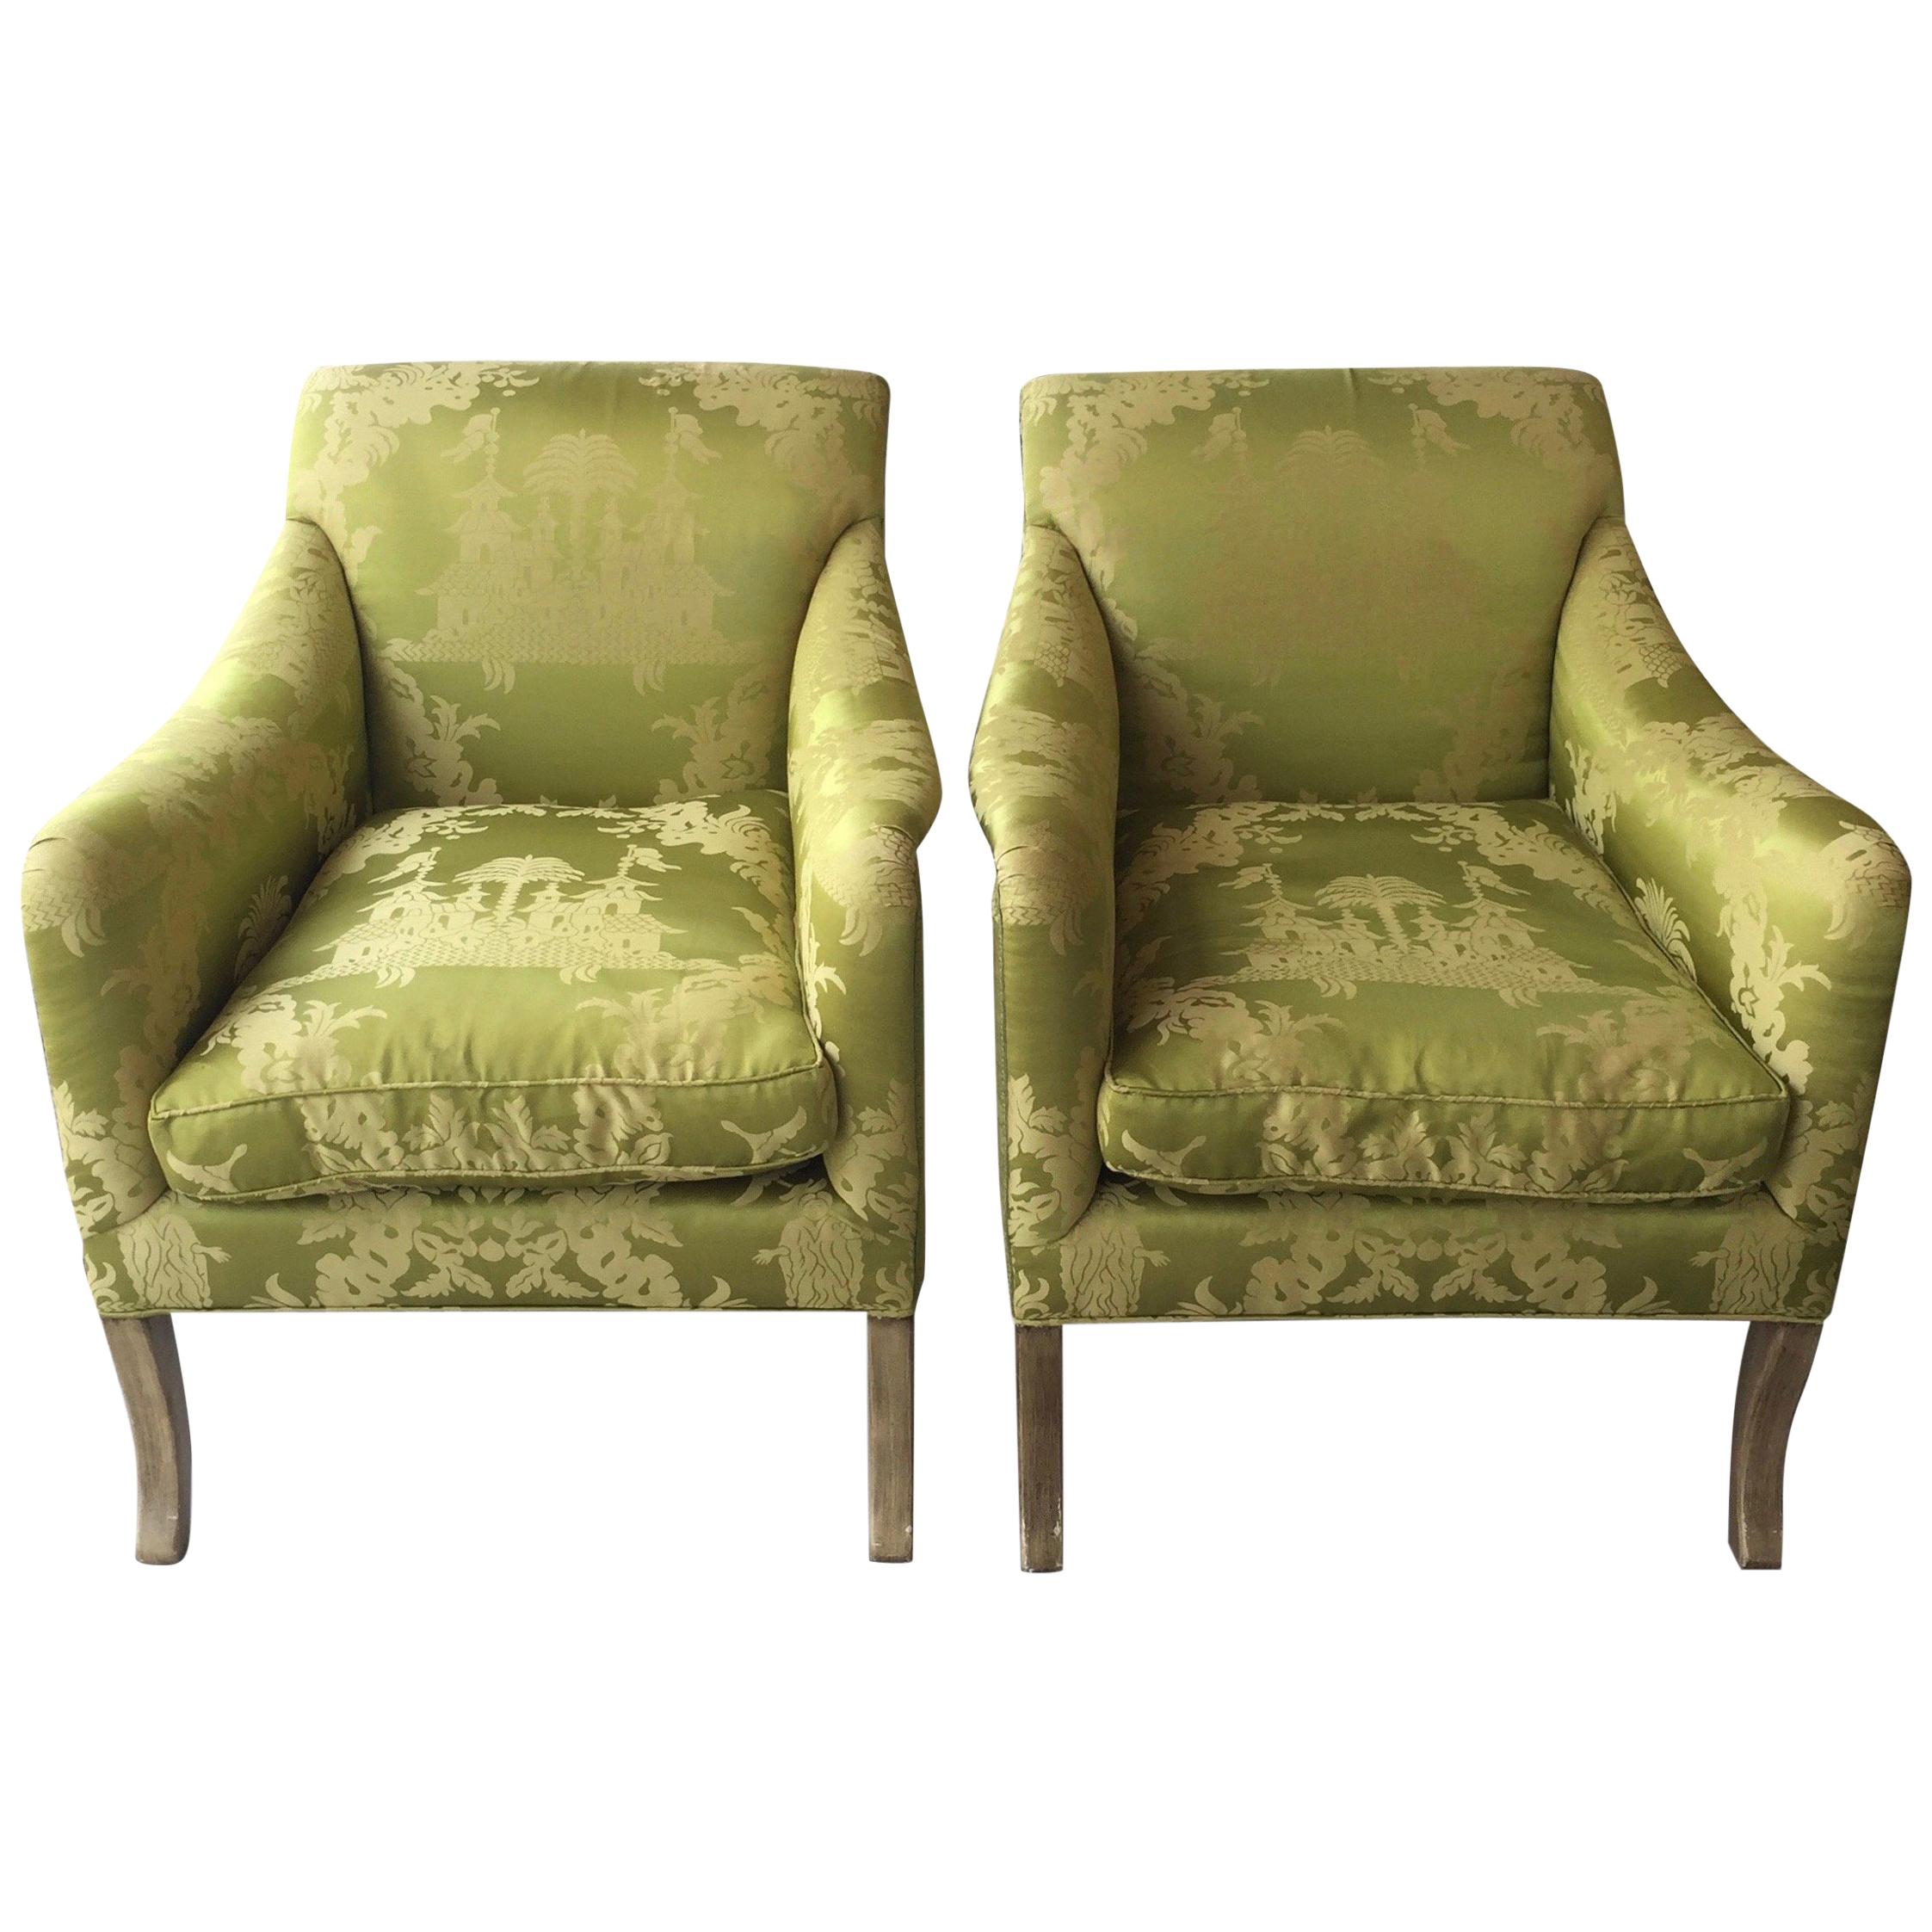 Neoclassical Lounge Chairs for William Eubanks in Chartreuse Chinoiserie Silk